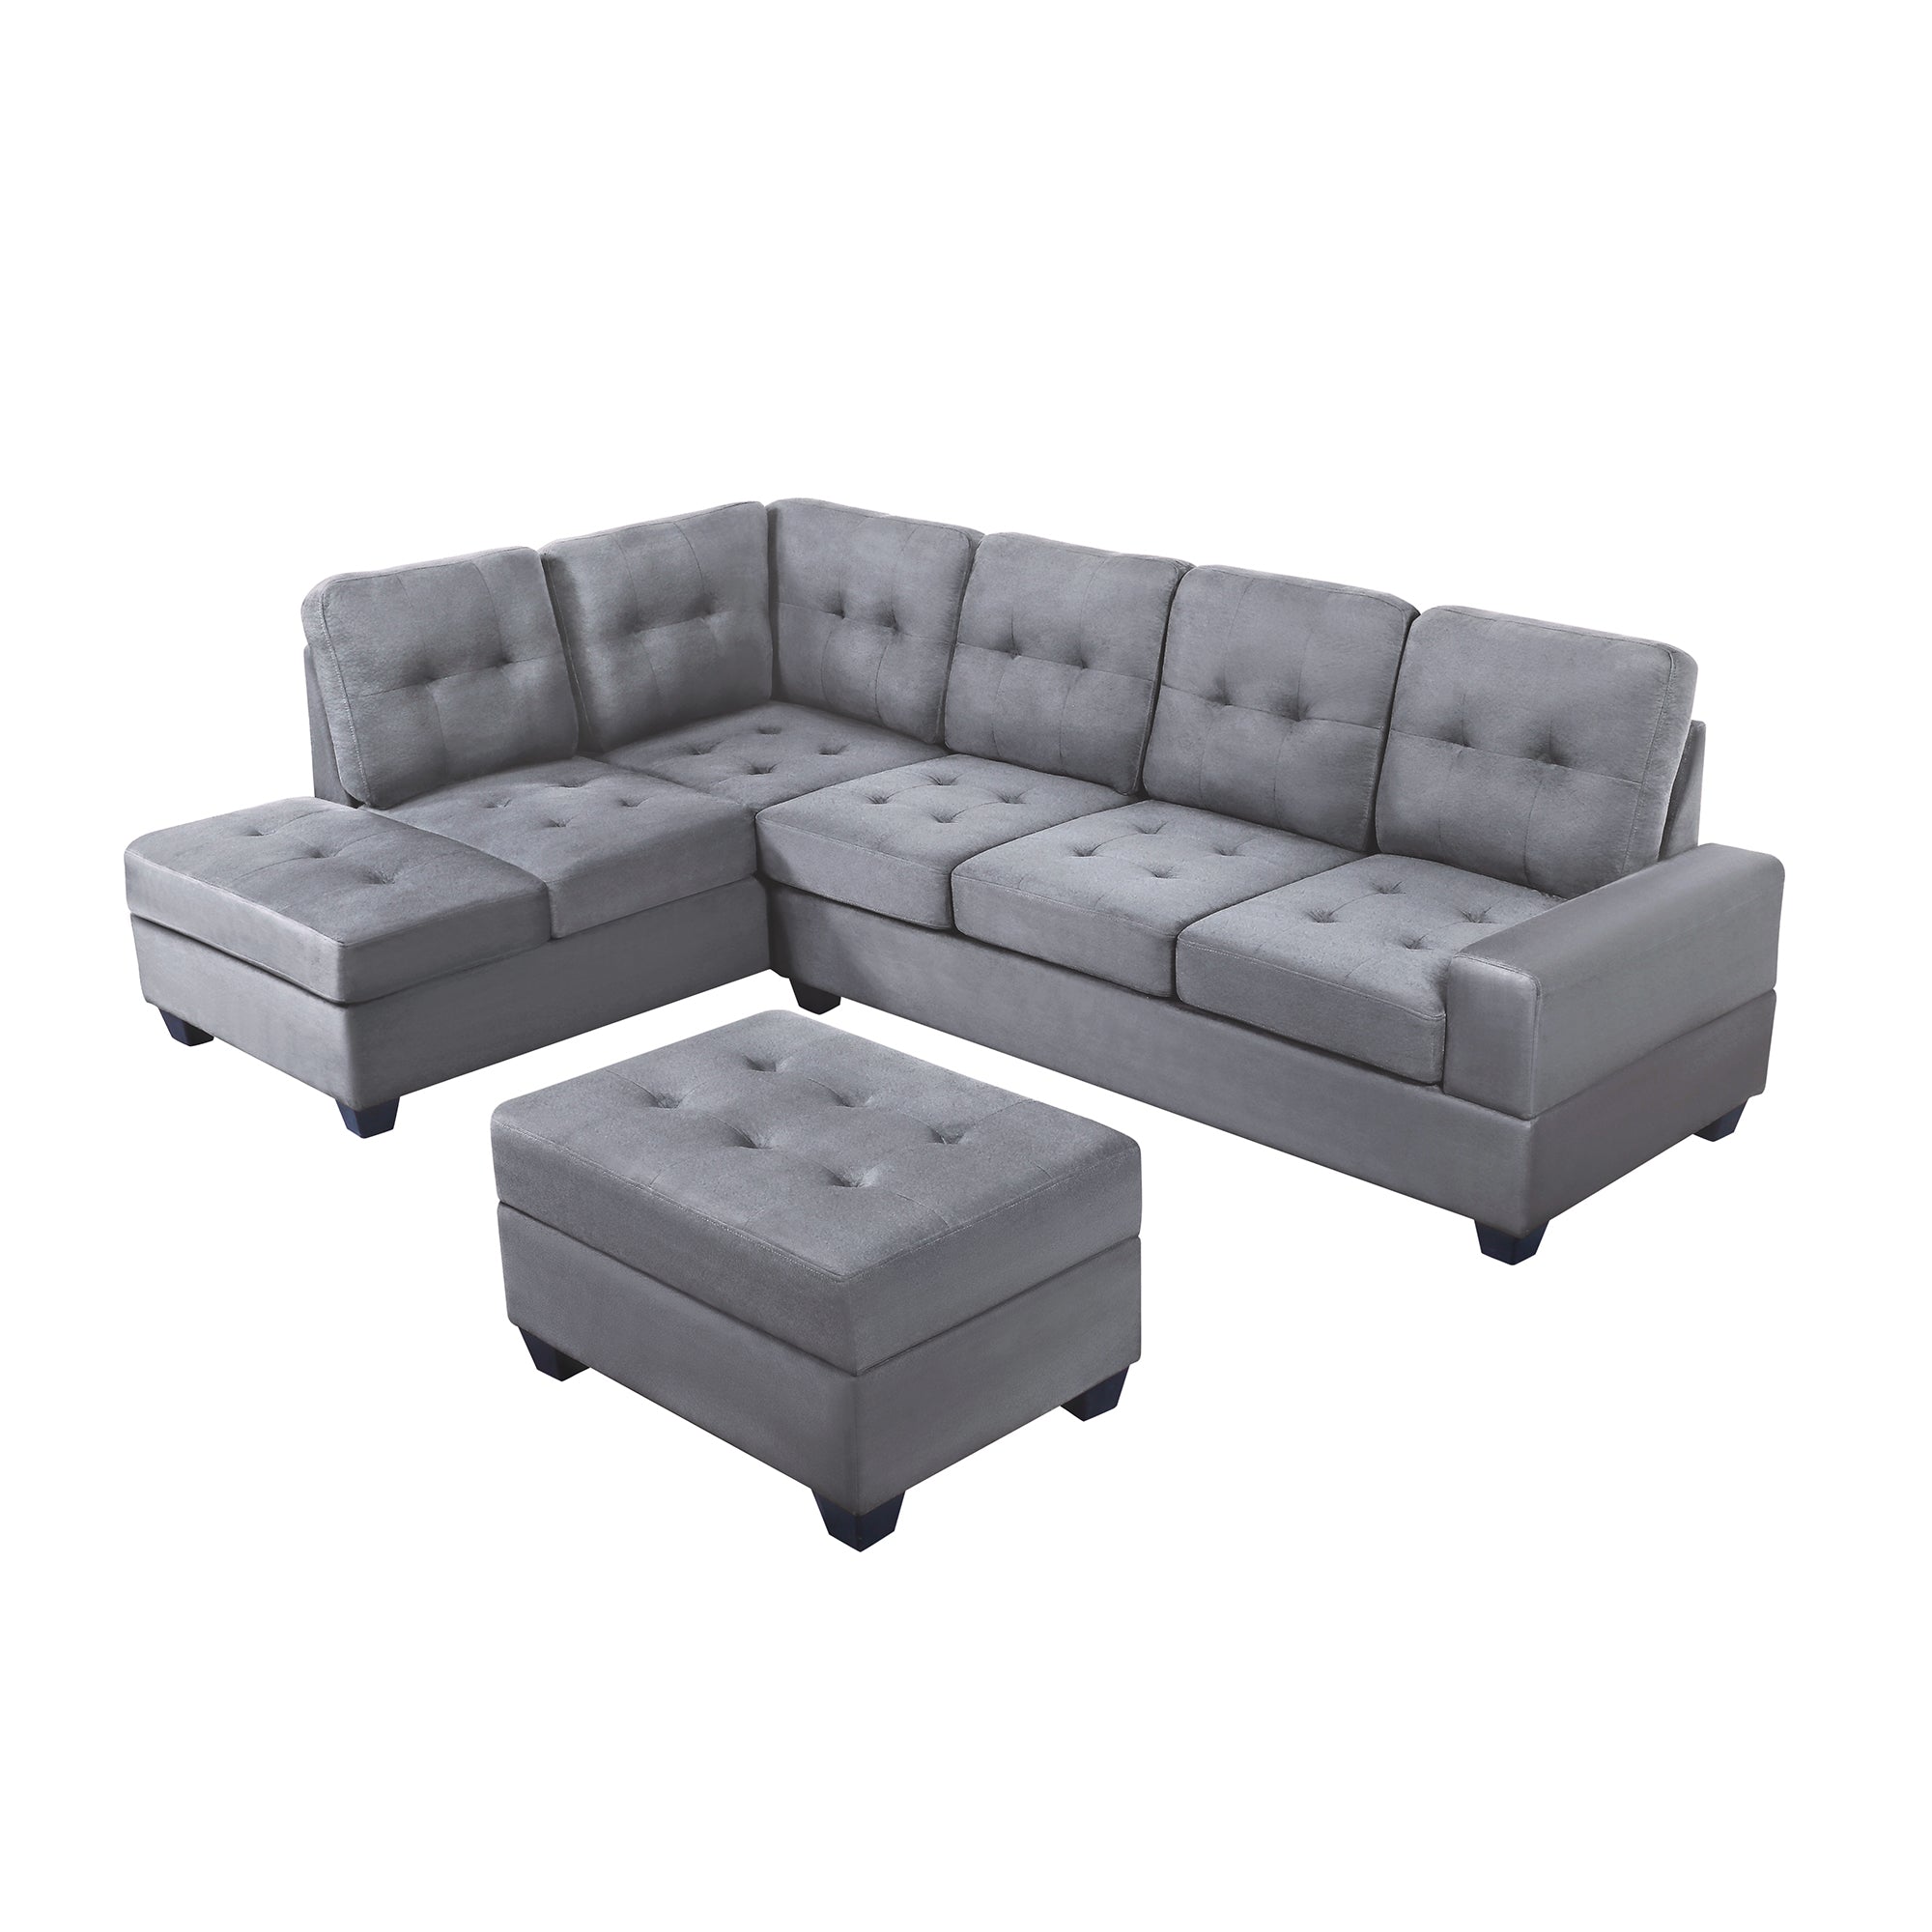 Sectional Sofa with Reversible Chaise Lounge, Storage Ottoman and Cup Holders-Boyel Living